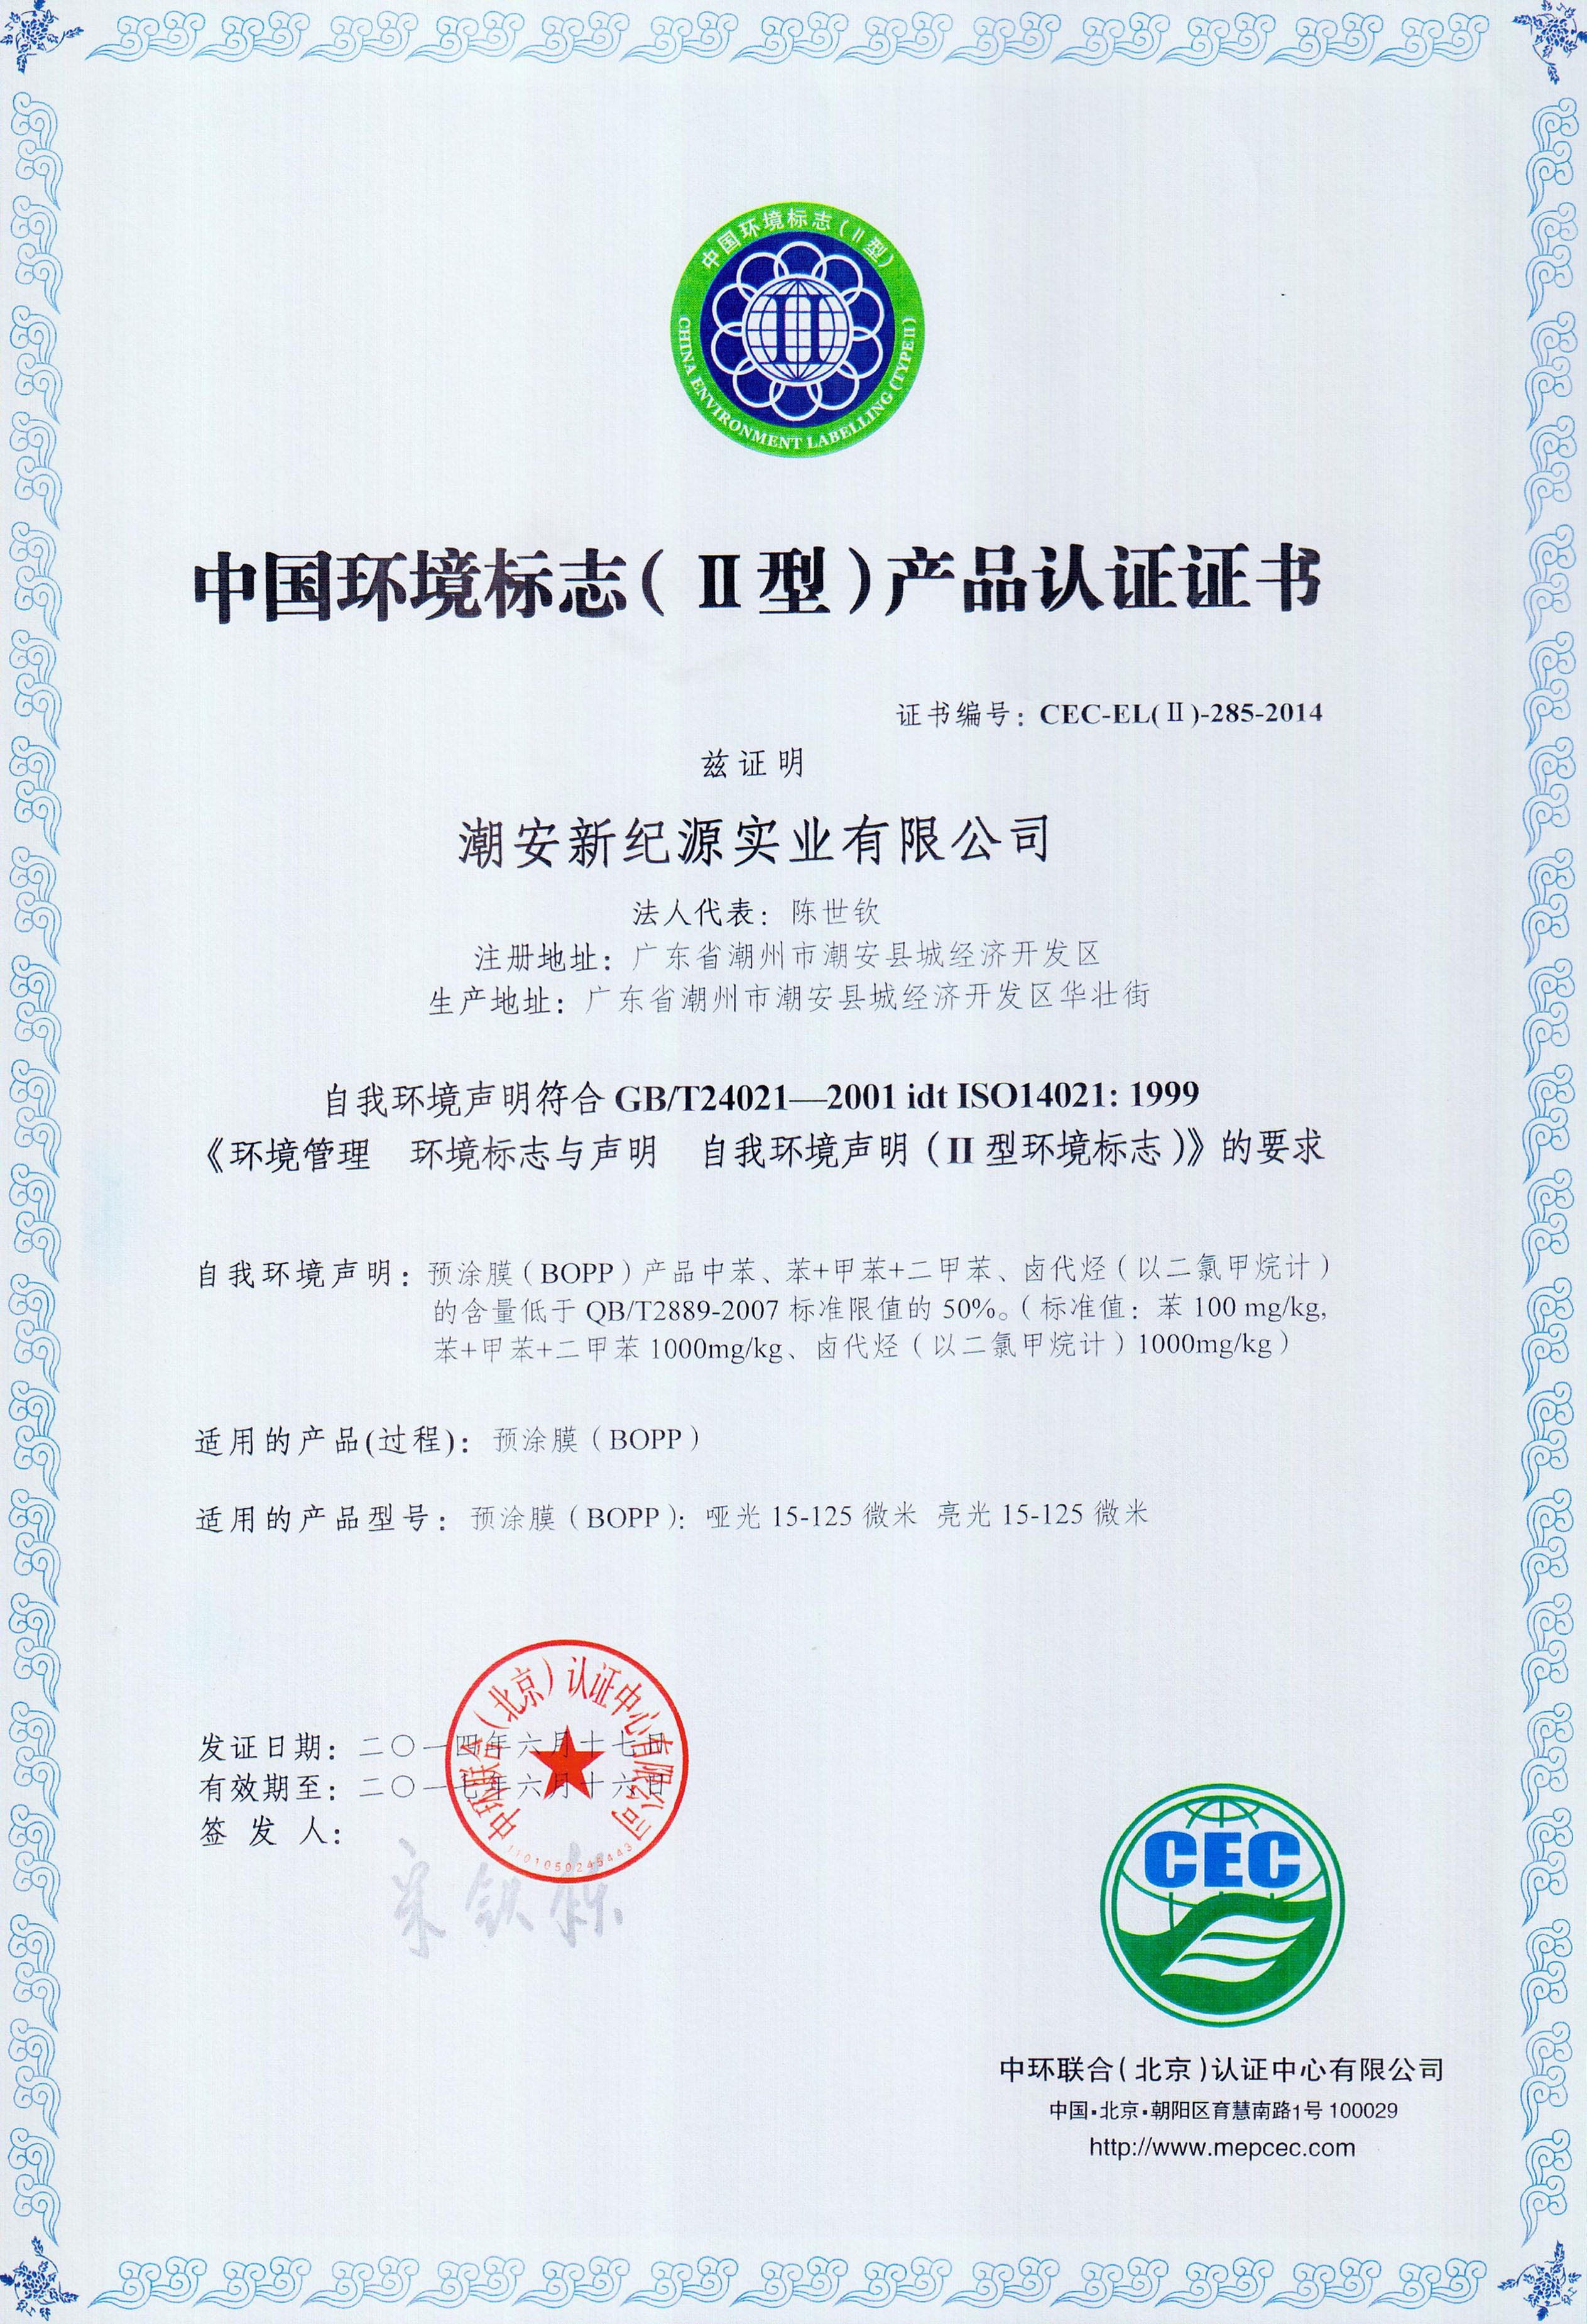 LA CHINE GUANGDONG NEW ERA      COMPOSITE           MATERIAL CO., LTD. Certifications